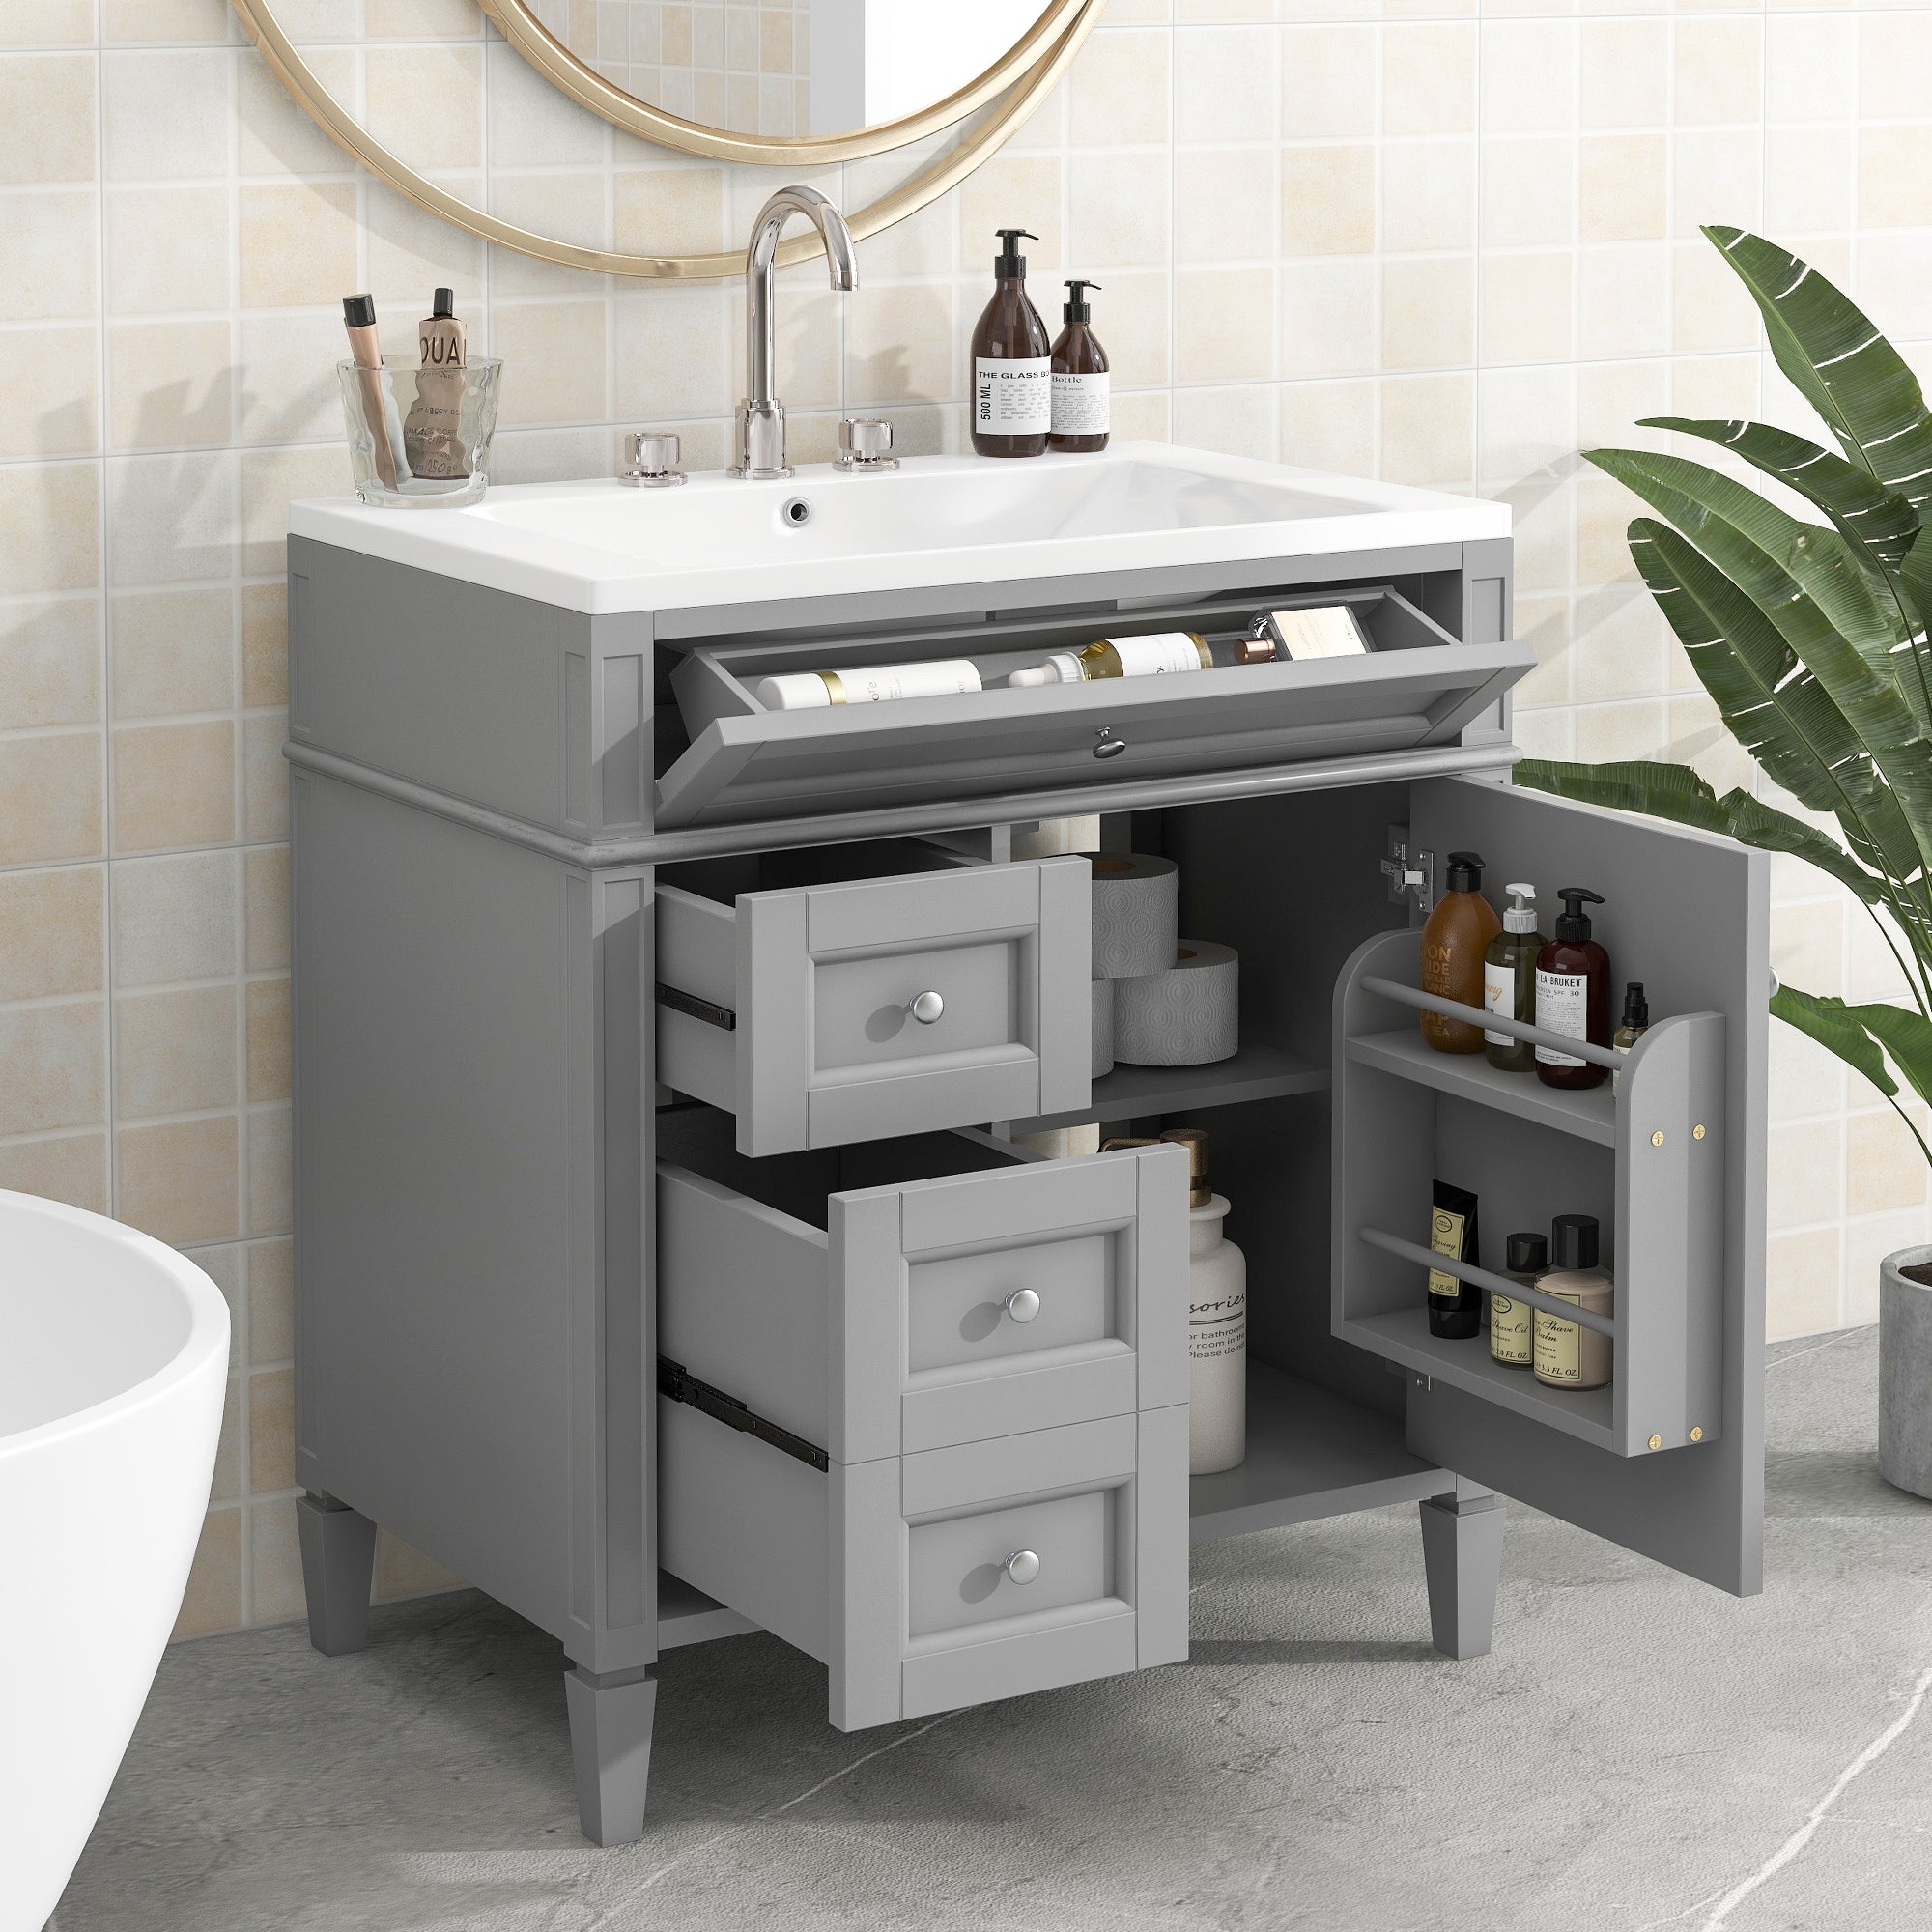 30'' Bathroom Vanity with Top Sink, Modern Bathroom Storage Cabinet with 2 Drawers and a Tip-out Drawer